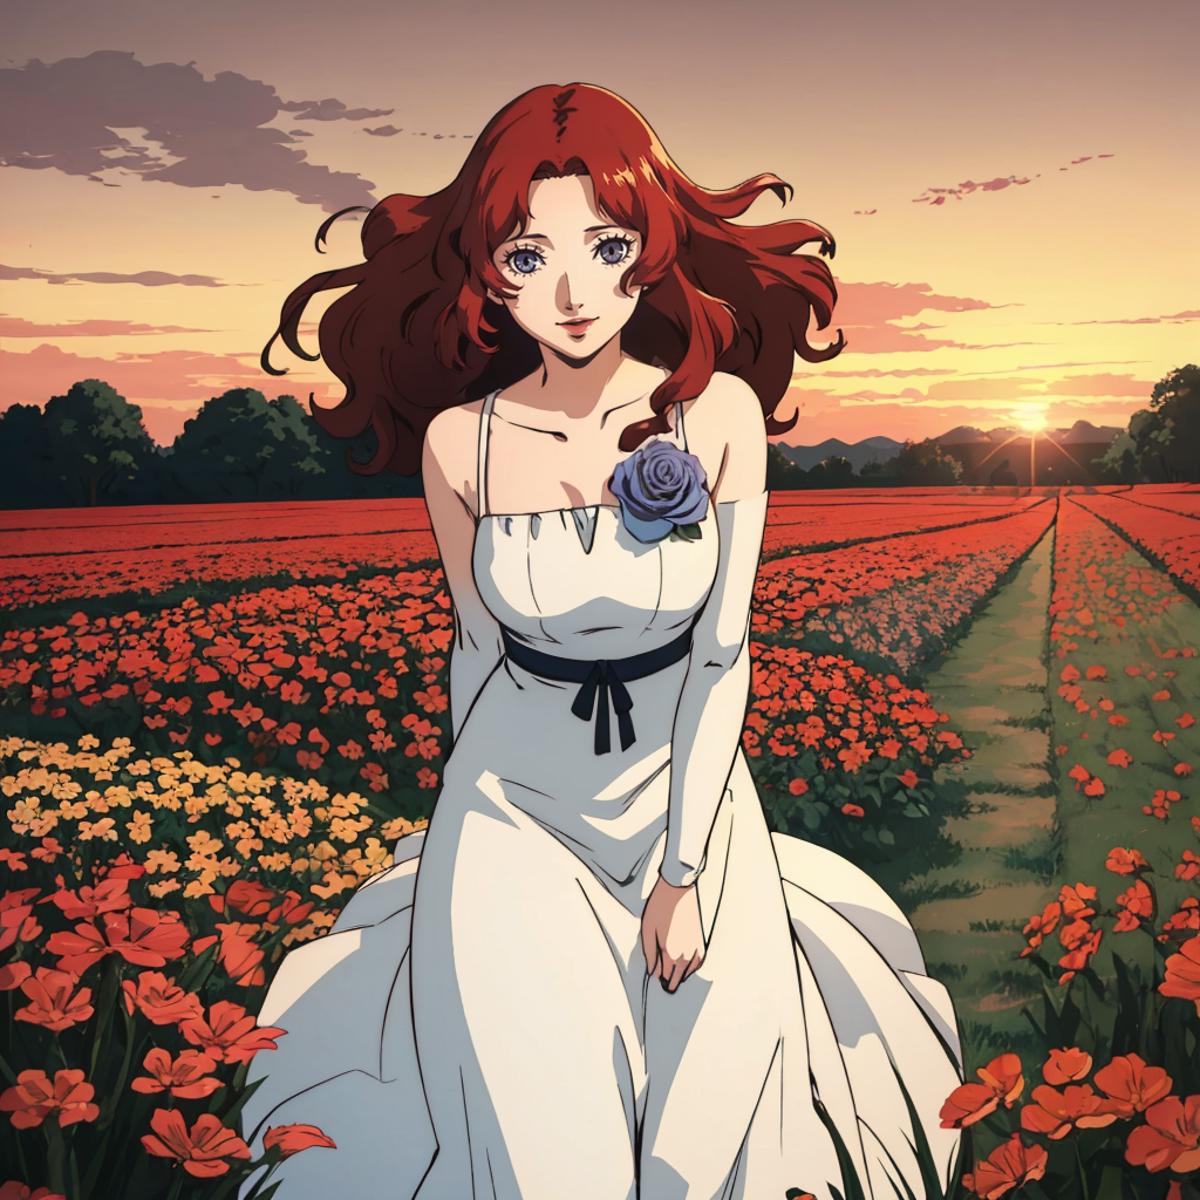 A woman with a white dress standing in a field of flowers.